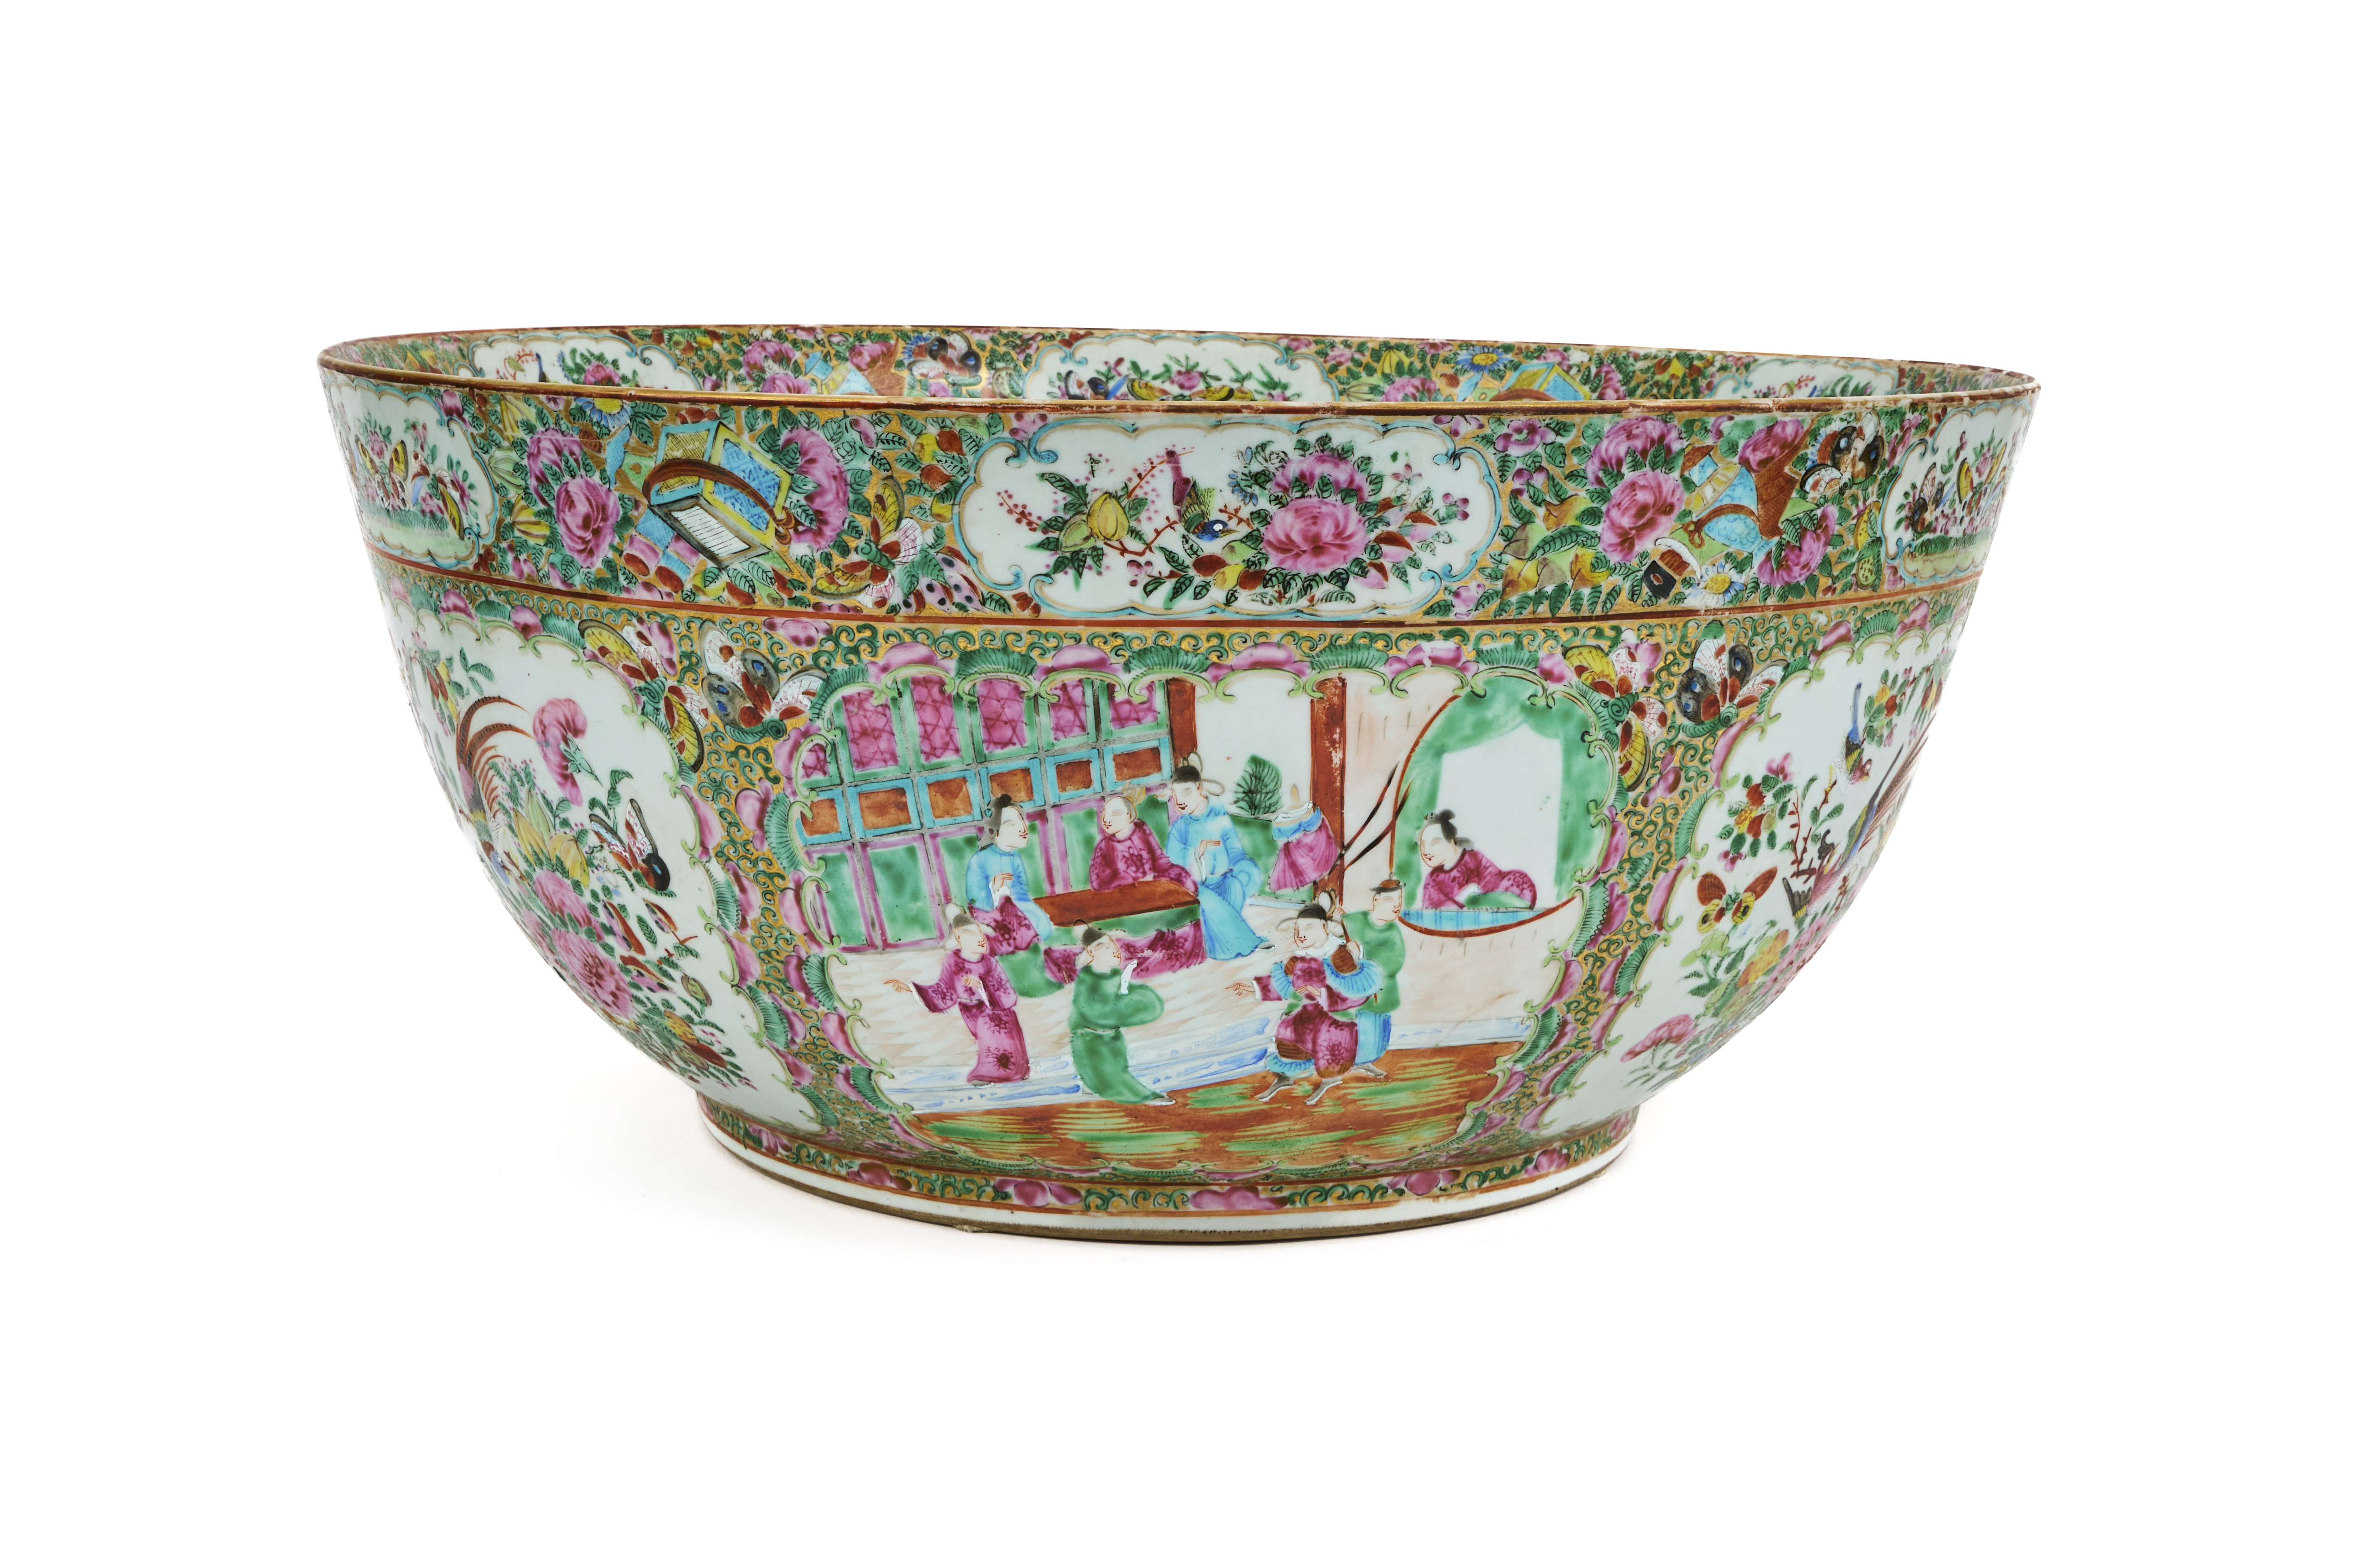 A MONUMENTAL CHINESE FAMILLE ROSE BOWL, 19TH CENTURY